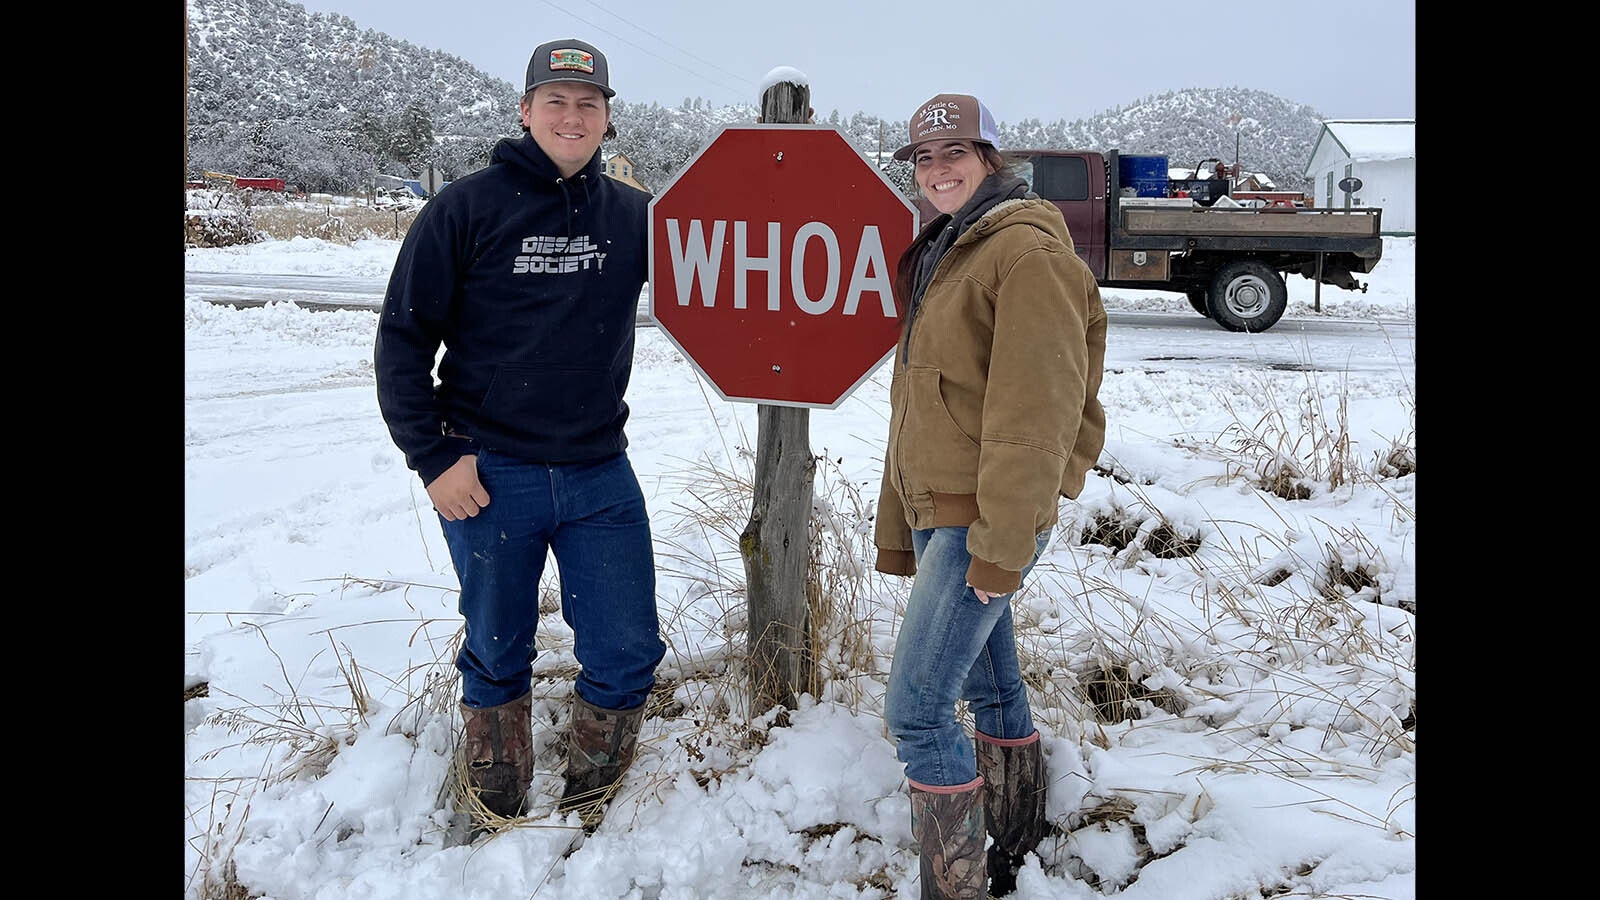 Easten and Esther Torgersen are the newest residents of tiny Alton, Utah, which has “Whoa” signs instead of stop signs – reflecting the community’s ranching roots.